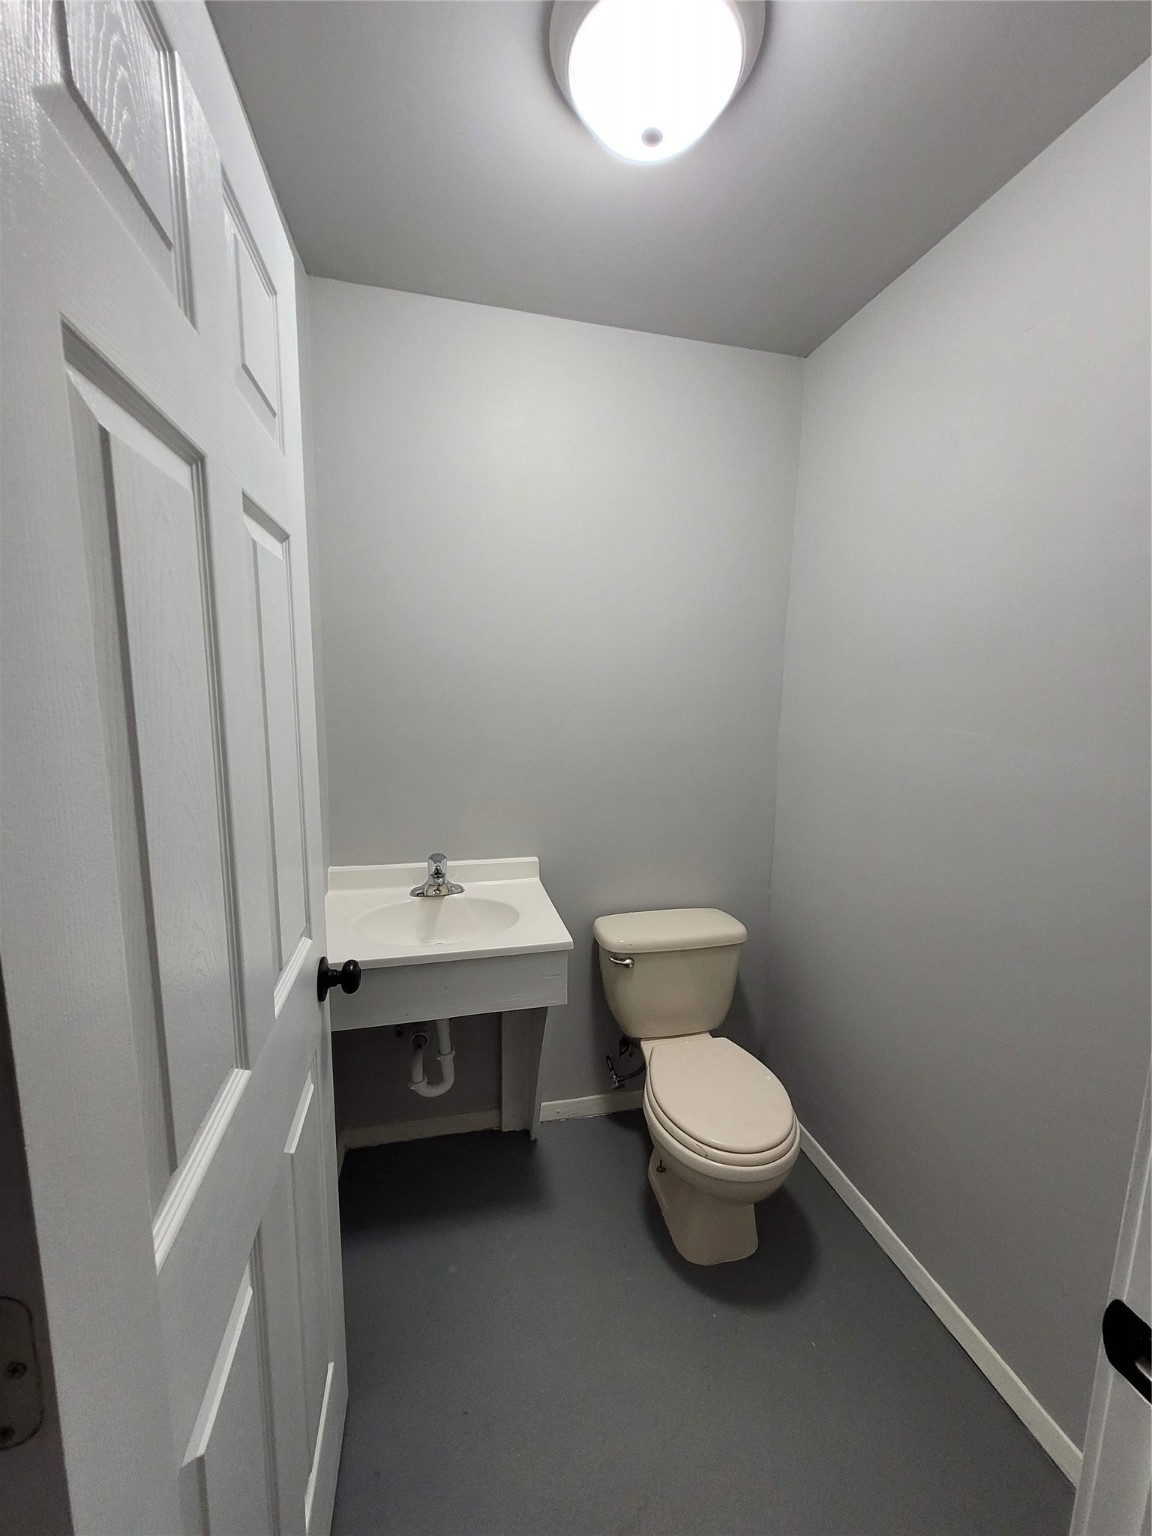 New bathroom was installed in the garage area